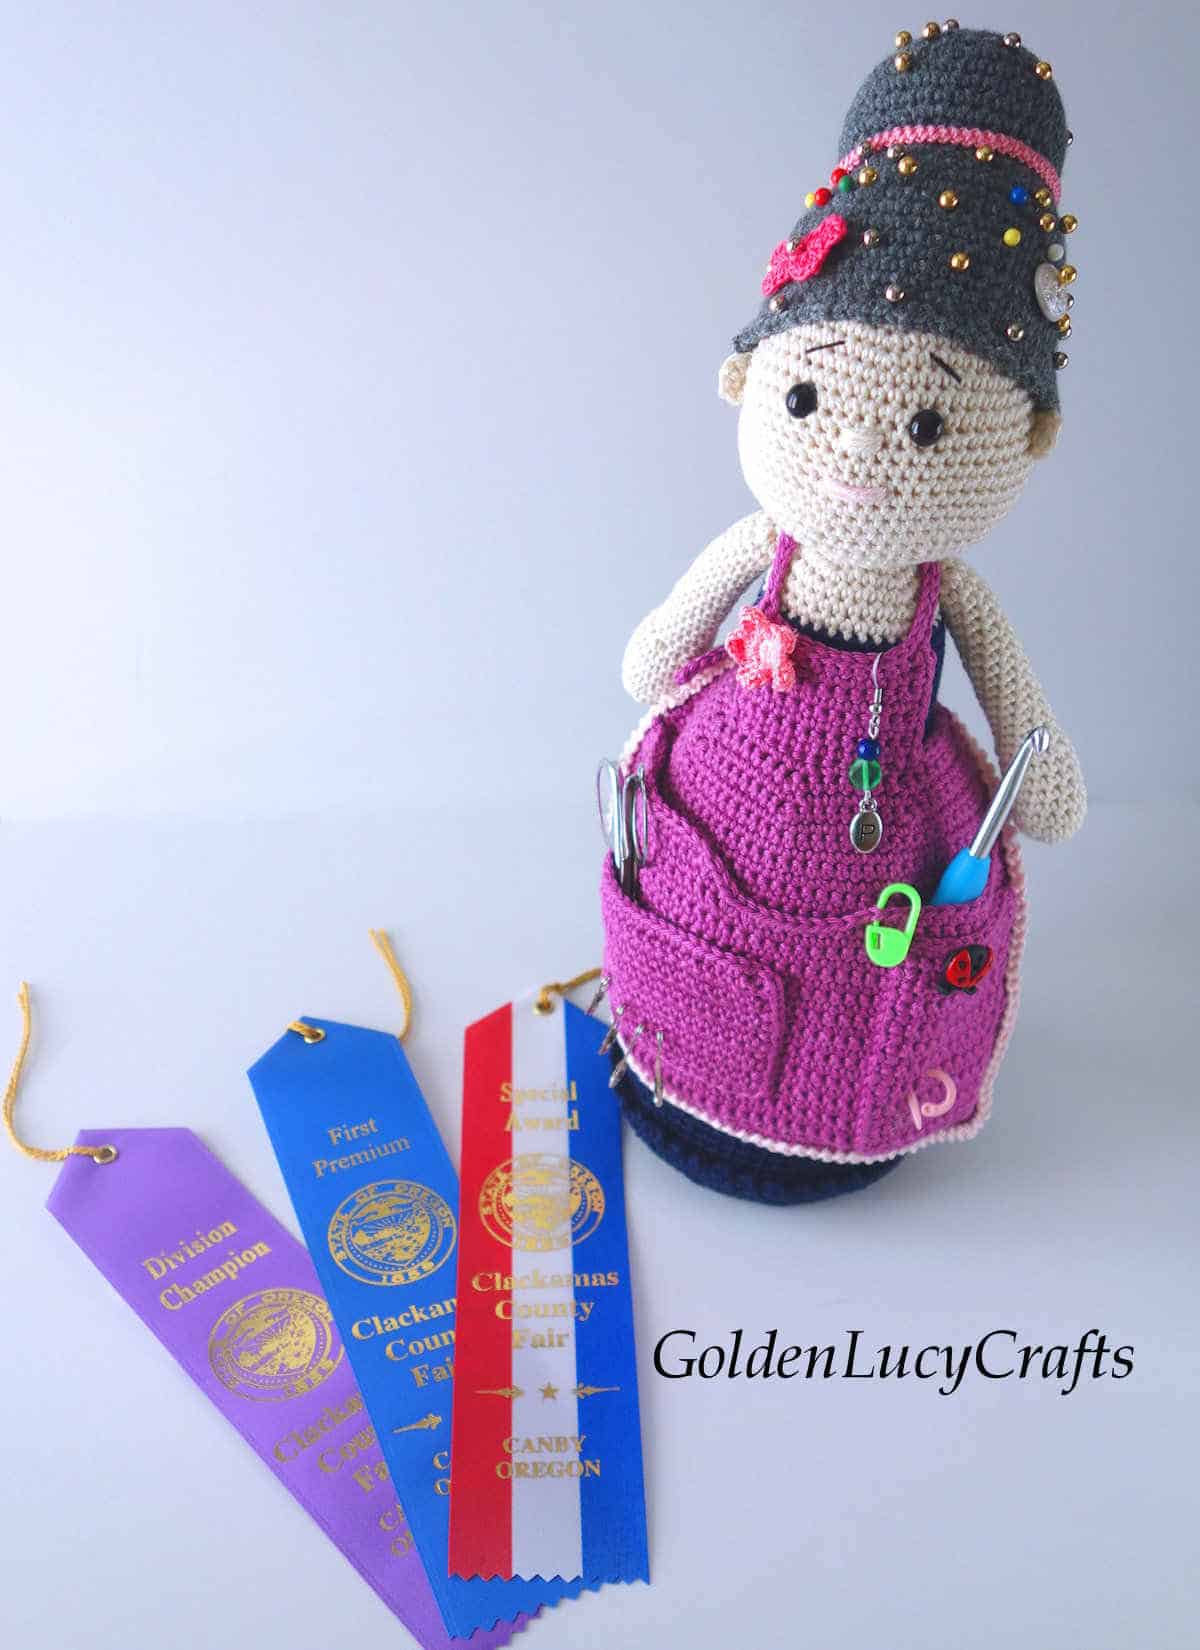 Crochet crafter granny doll and three ribbons.